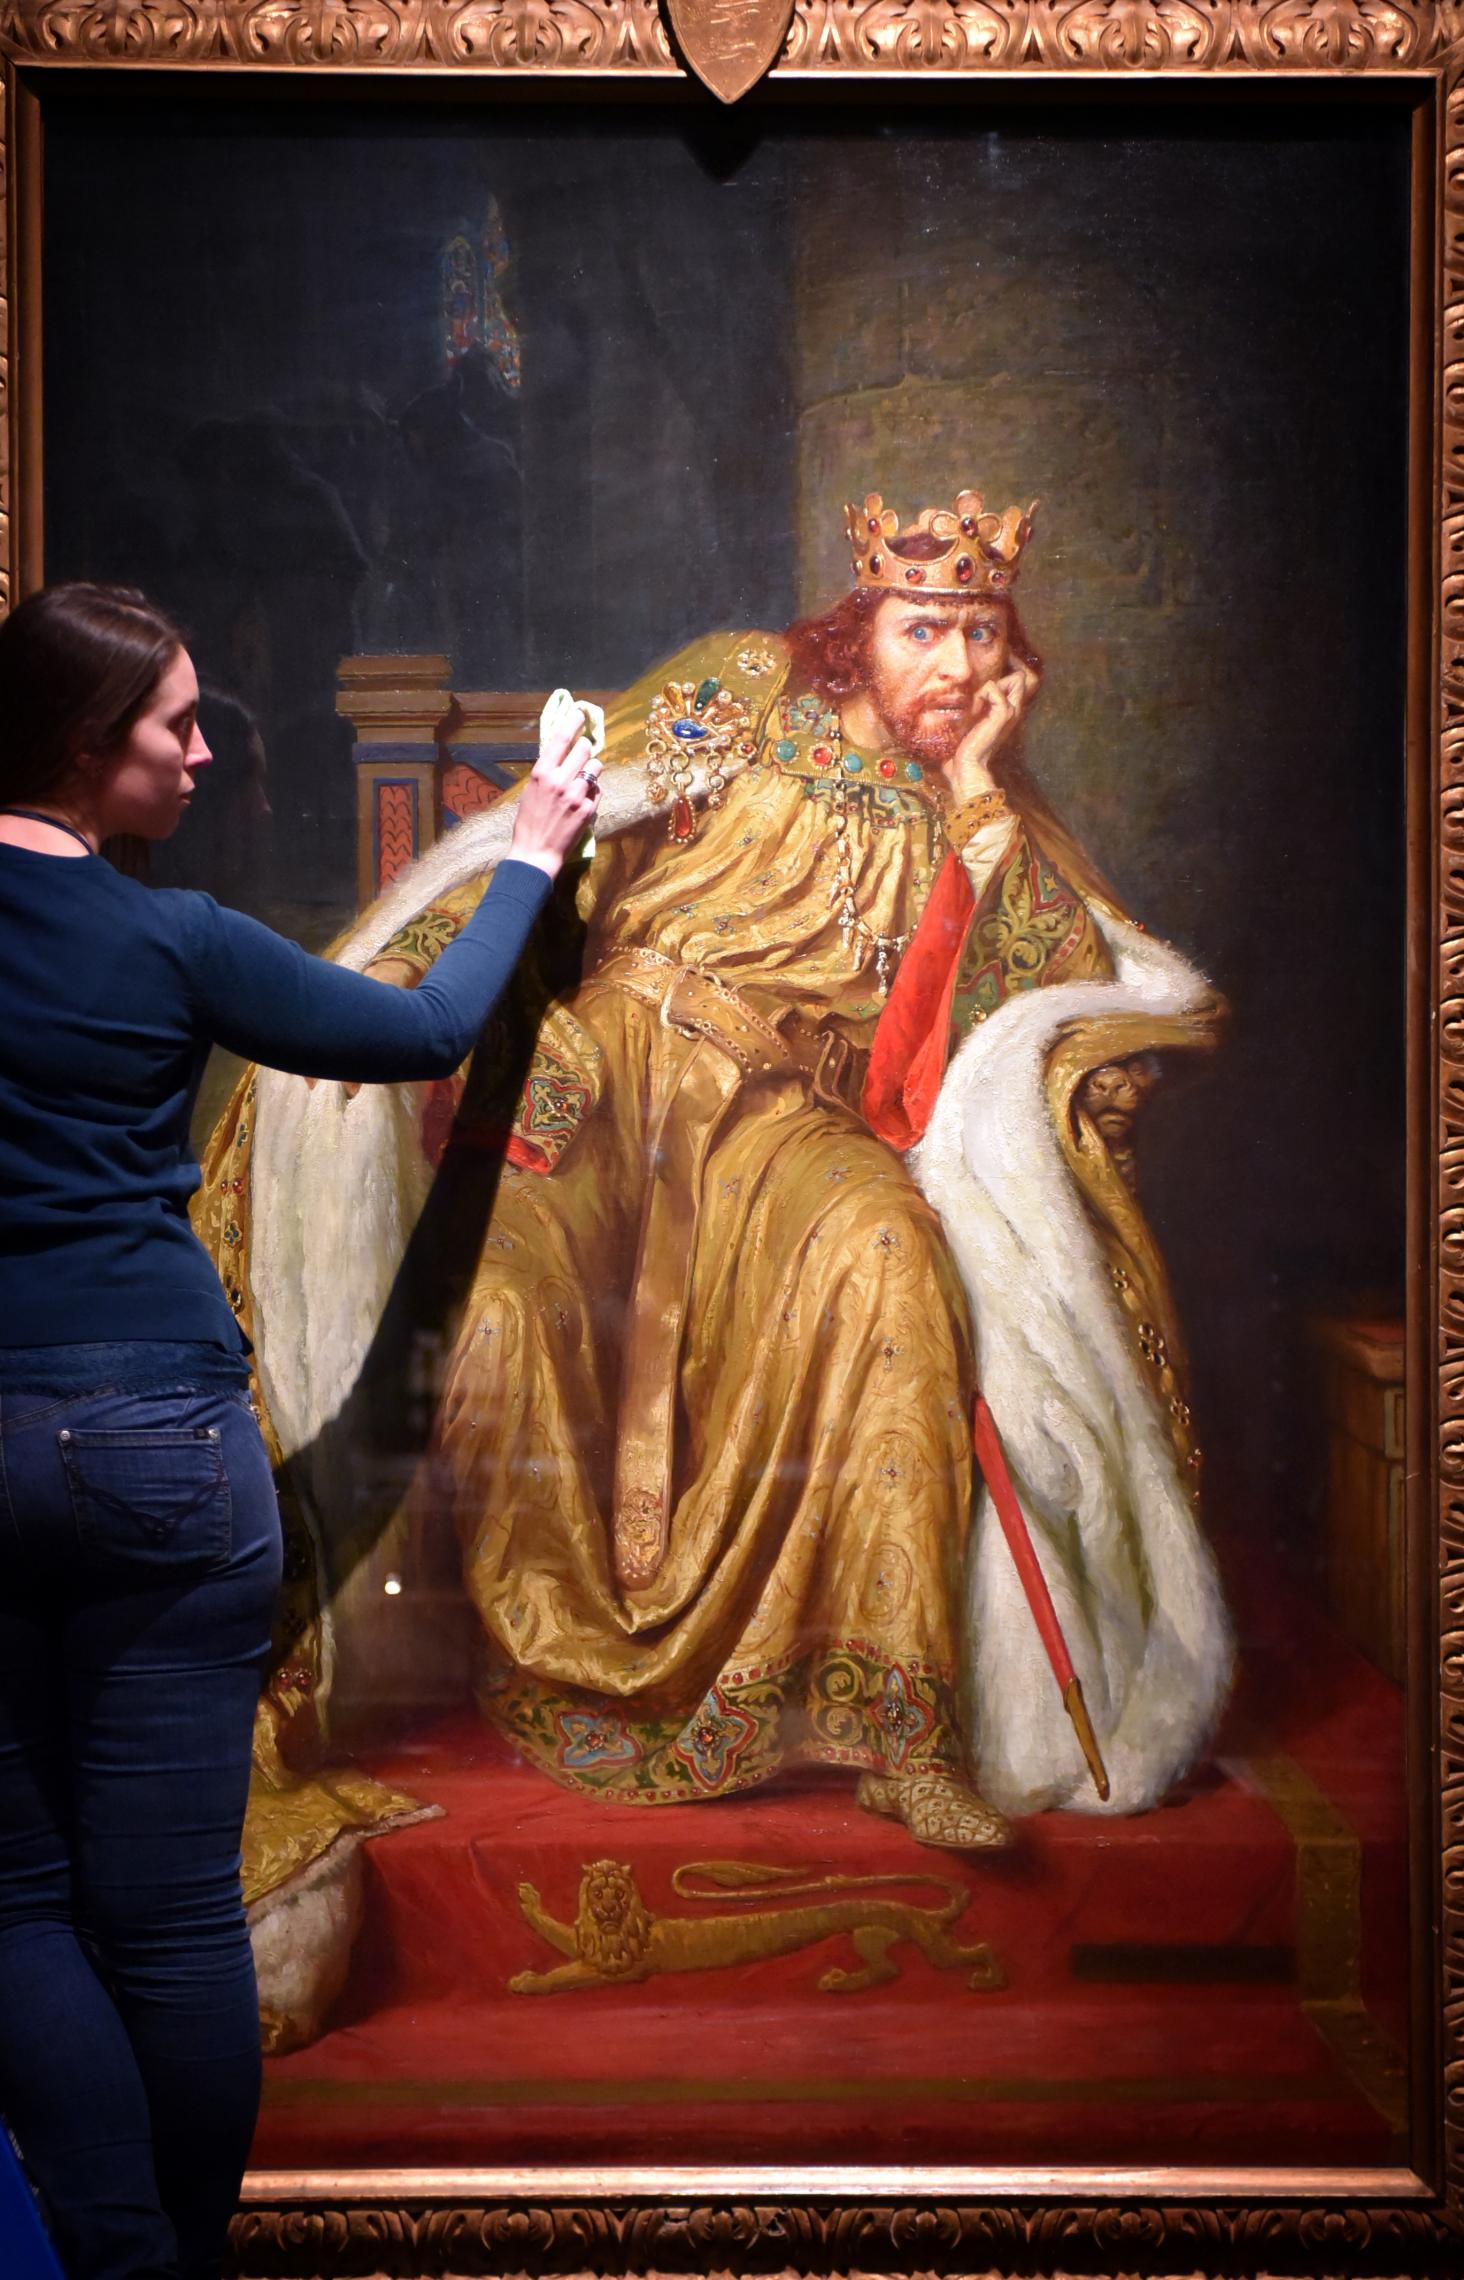 Alex Kavanagh, exhibition officer, polishes a painting of King John.The painting is part of the British Library's Magna Carta: Law, Liberty,Lecacy exhibition which will be opened until 1 September 2015. Photo by Clare Kendall, @C British Library 